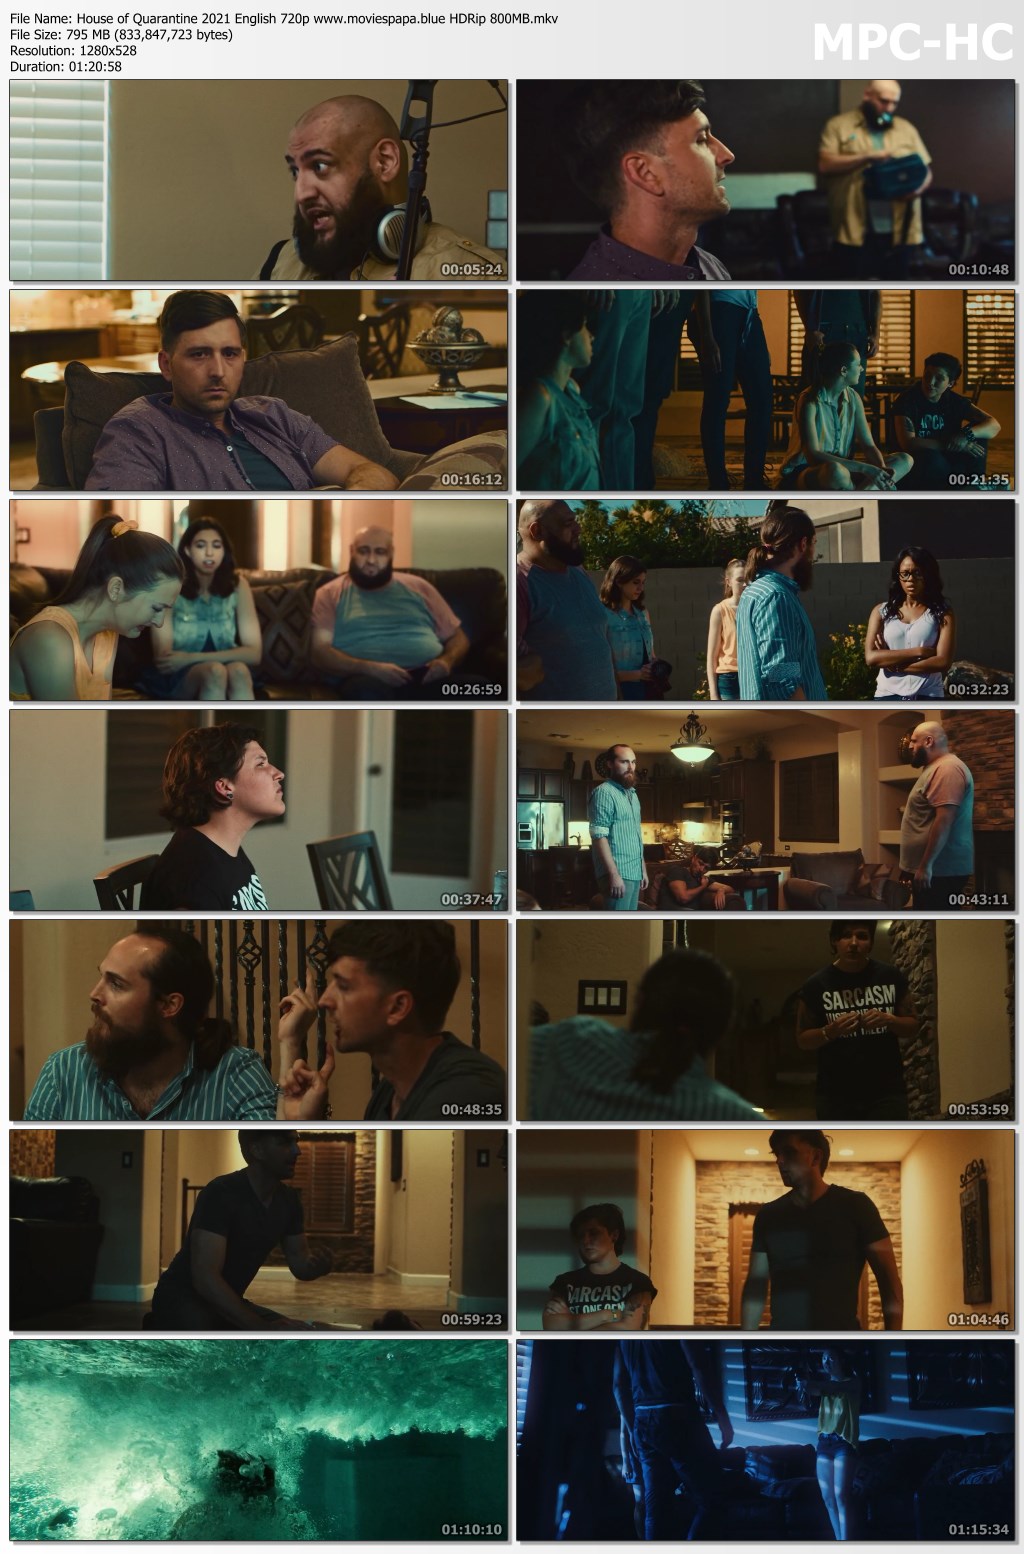 the house movie 720p watch